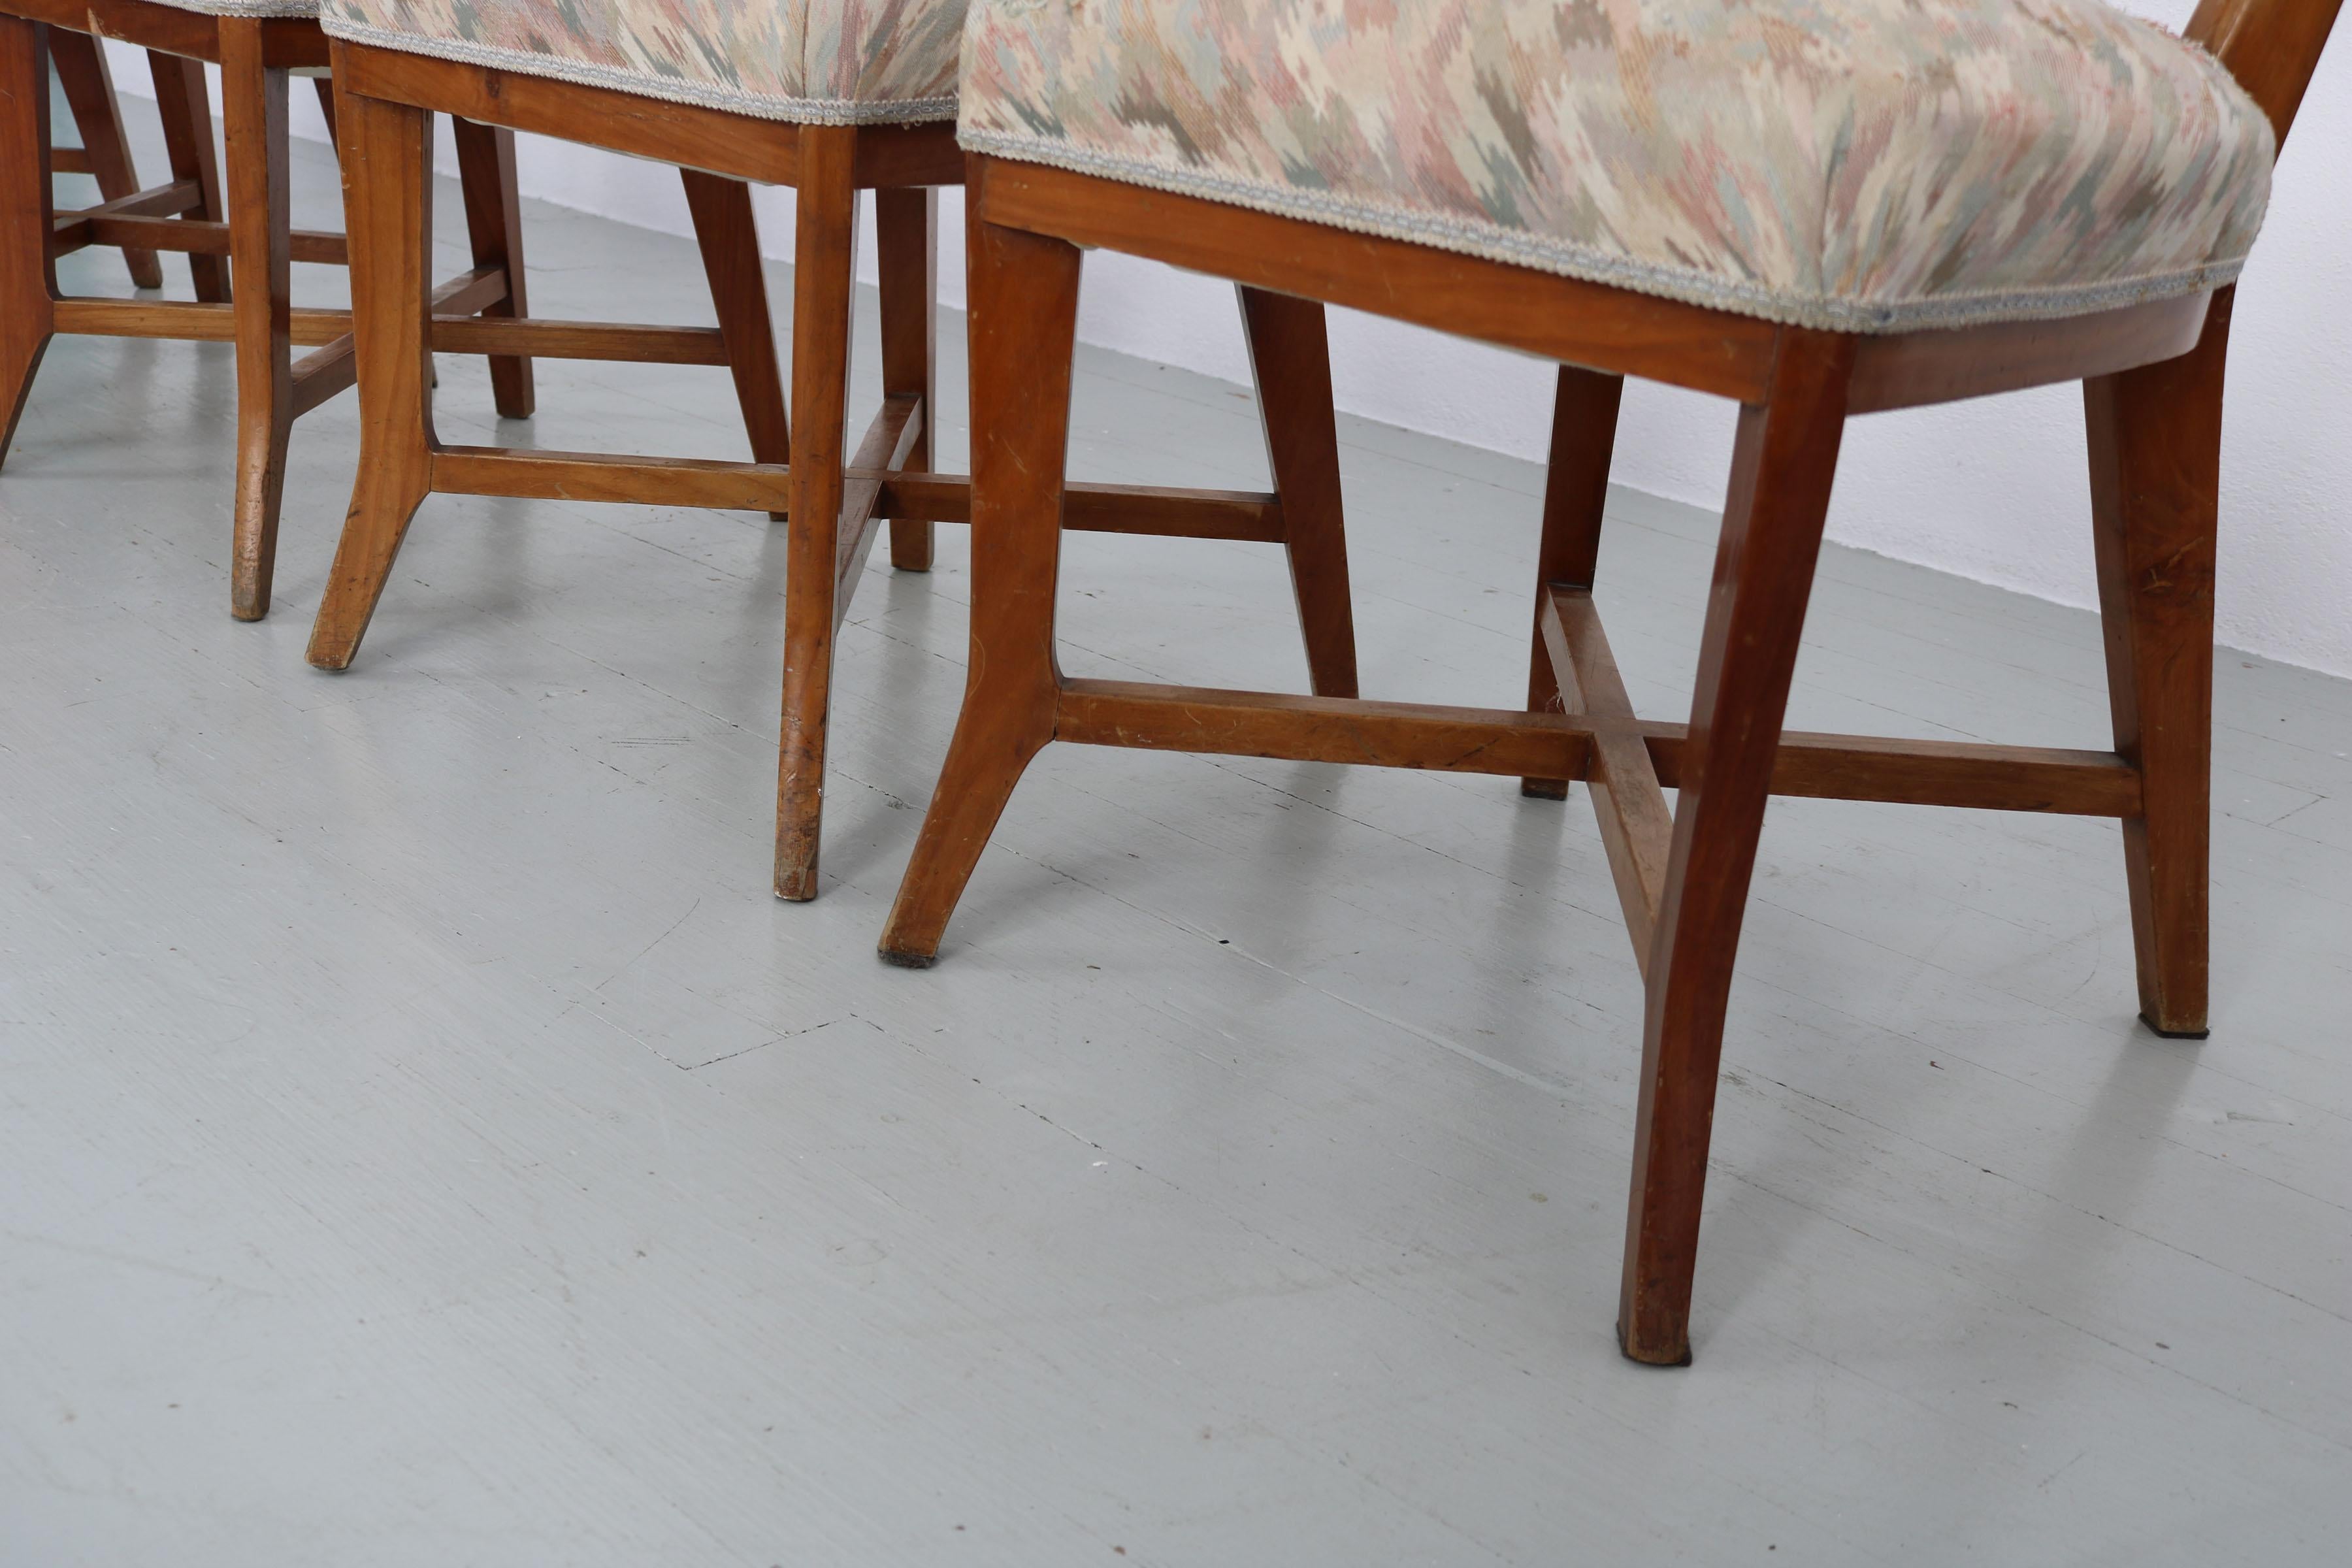 Set of 6 Melchiorre Bega Chairs Made of Cherrywood, Italy, 1950s For Sale 10